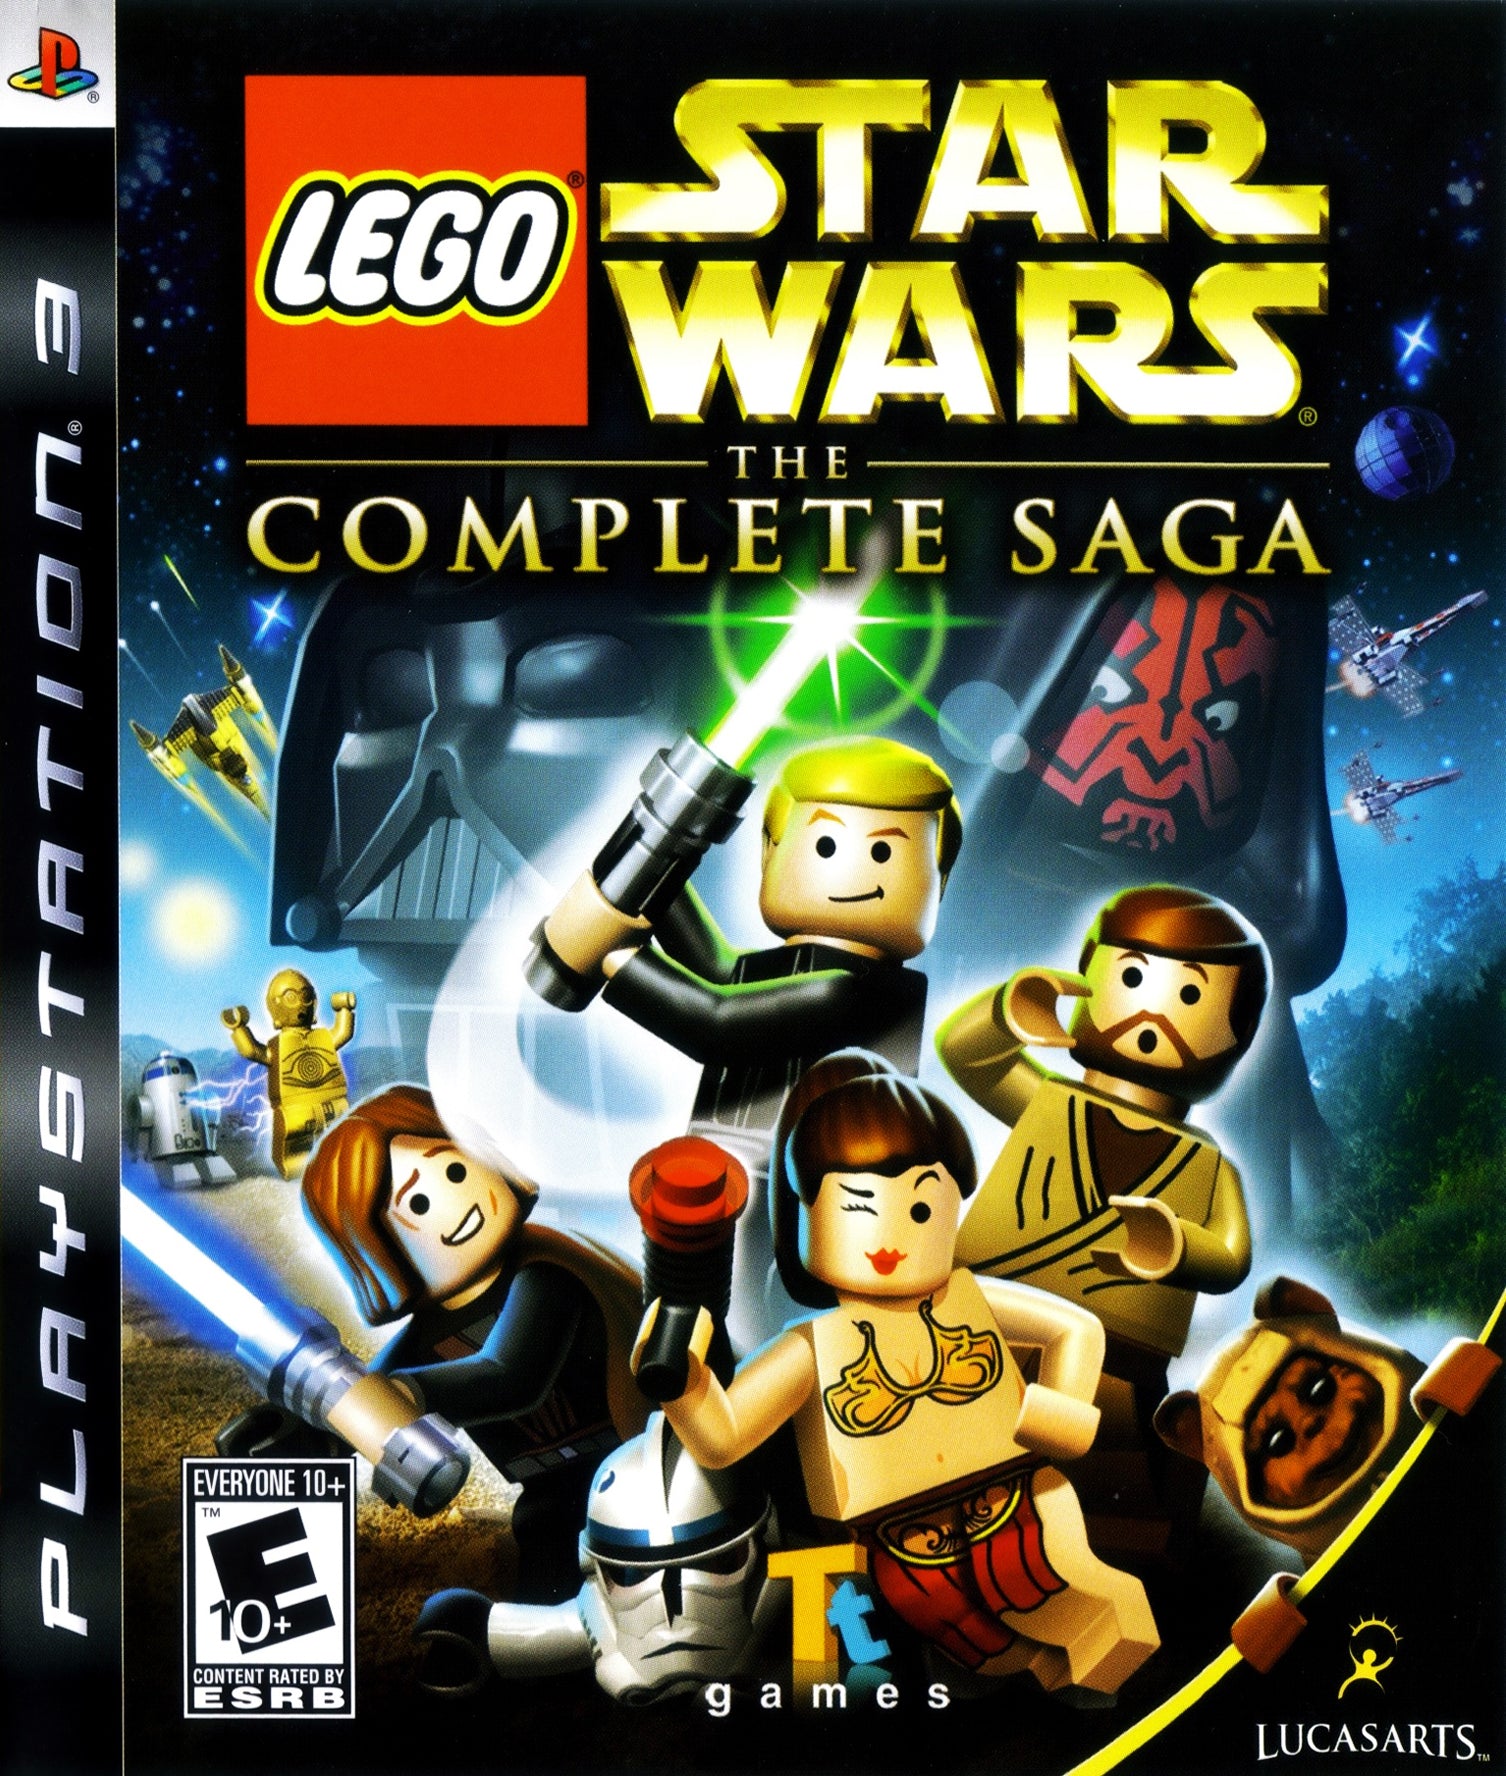 LEGO Star Wars: The Complete Saga - PlayStation 3 (PS3) Game